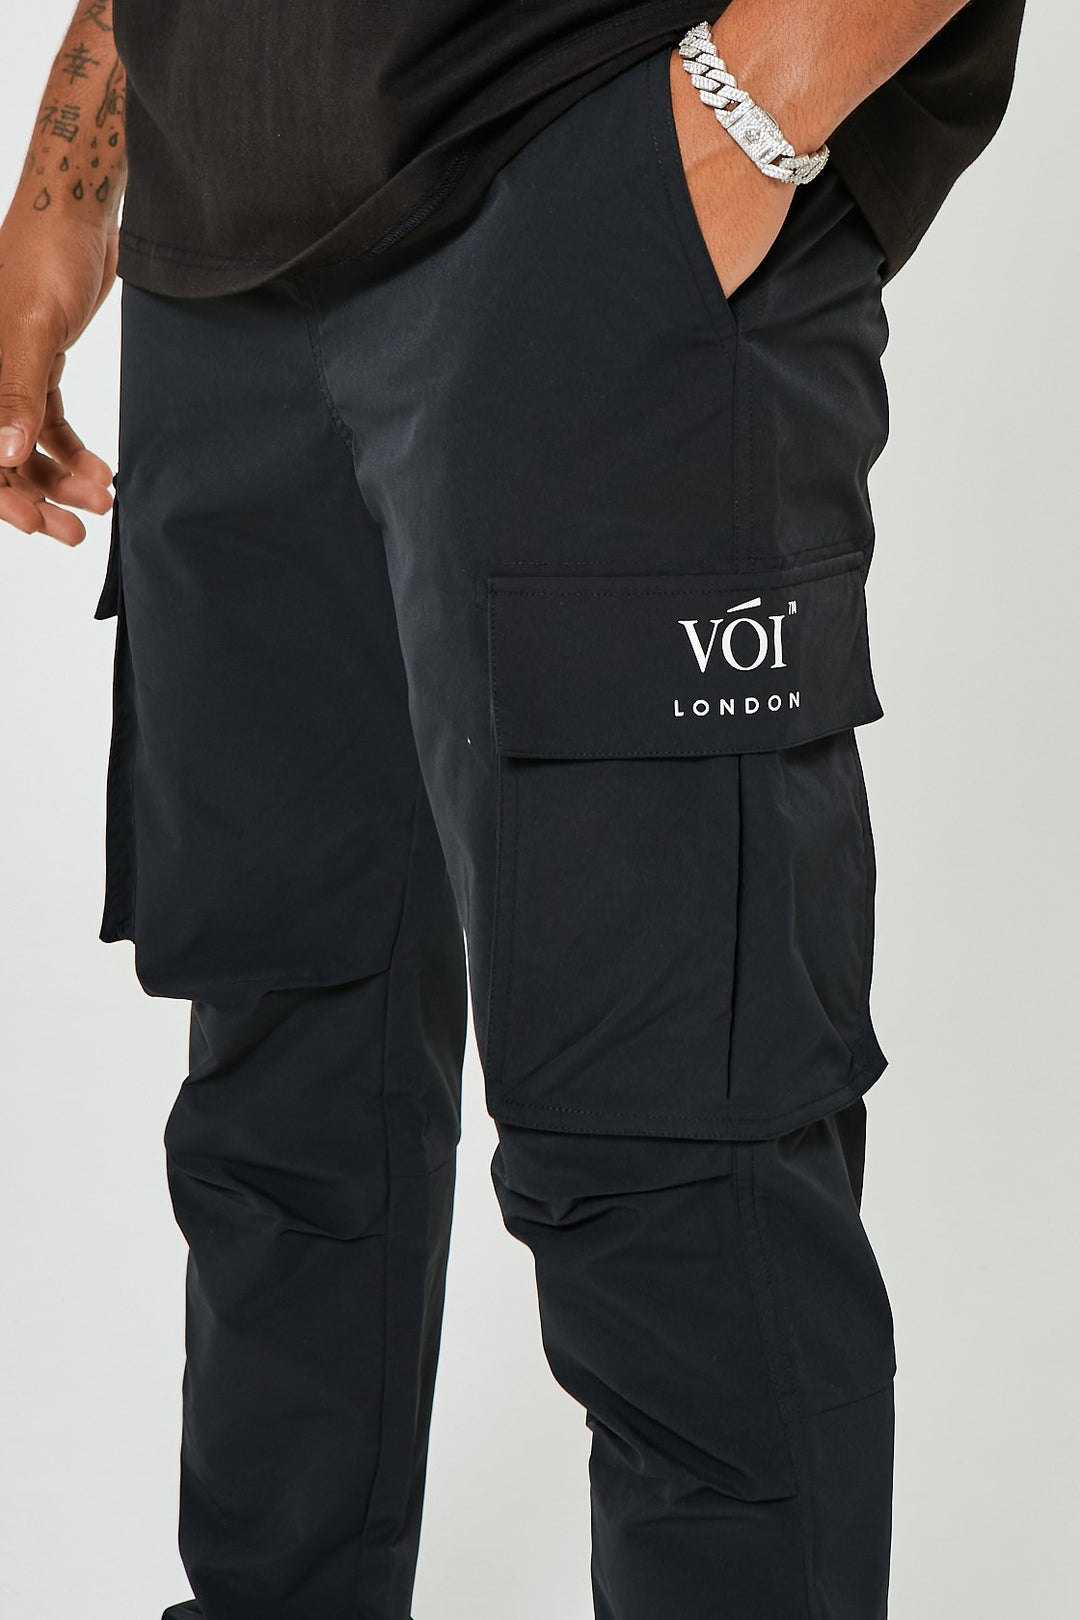 Park Place Tapered Woven Cargo Pants - Black